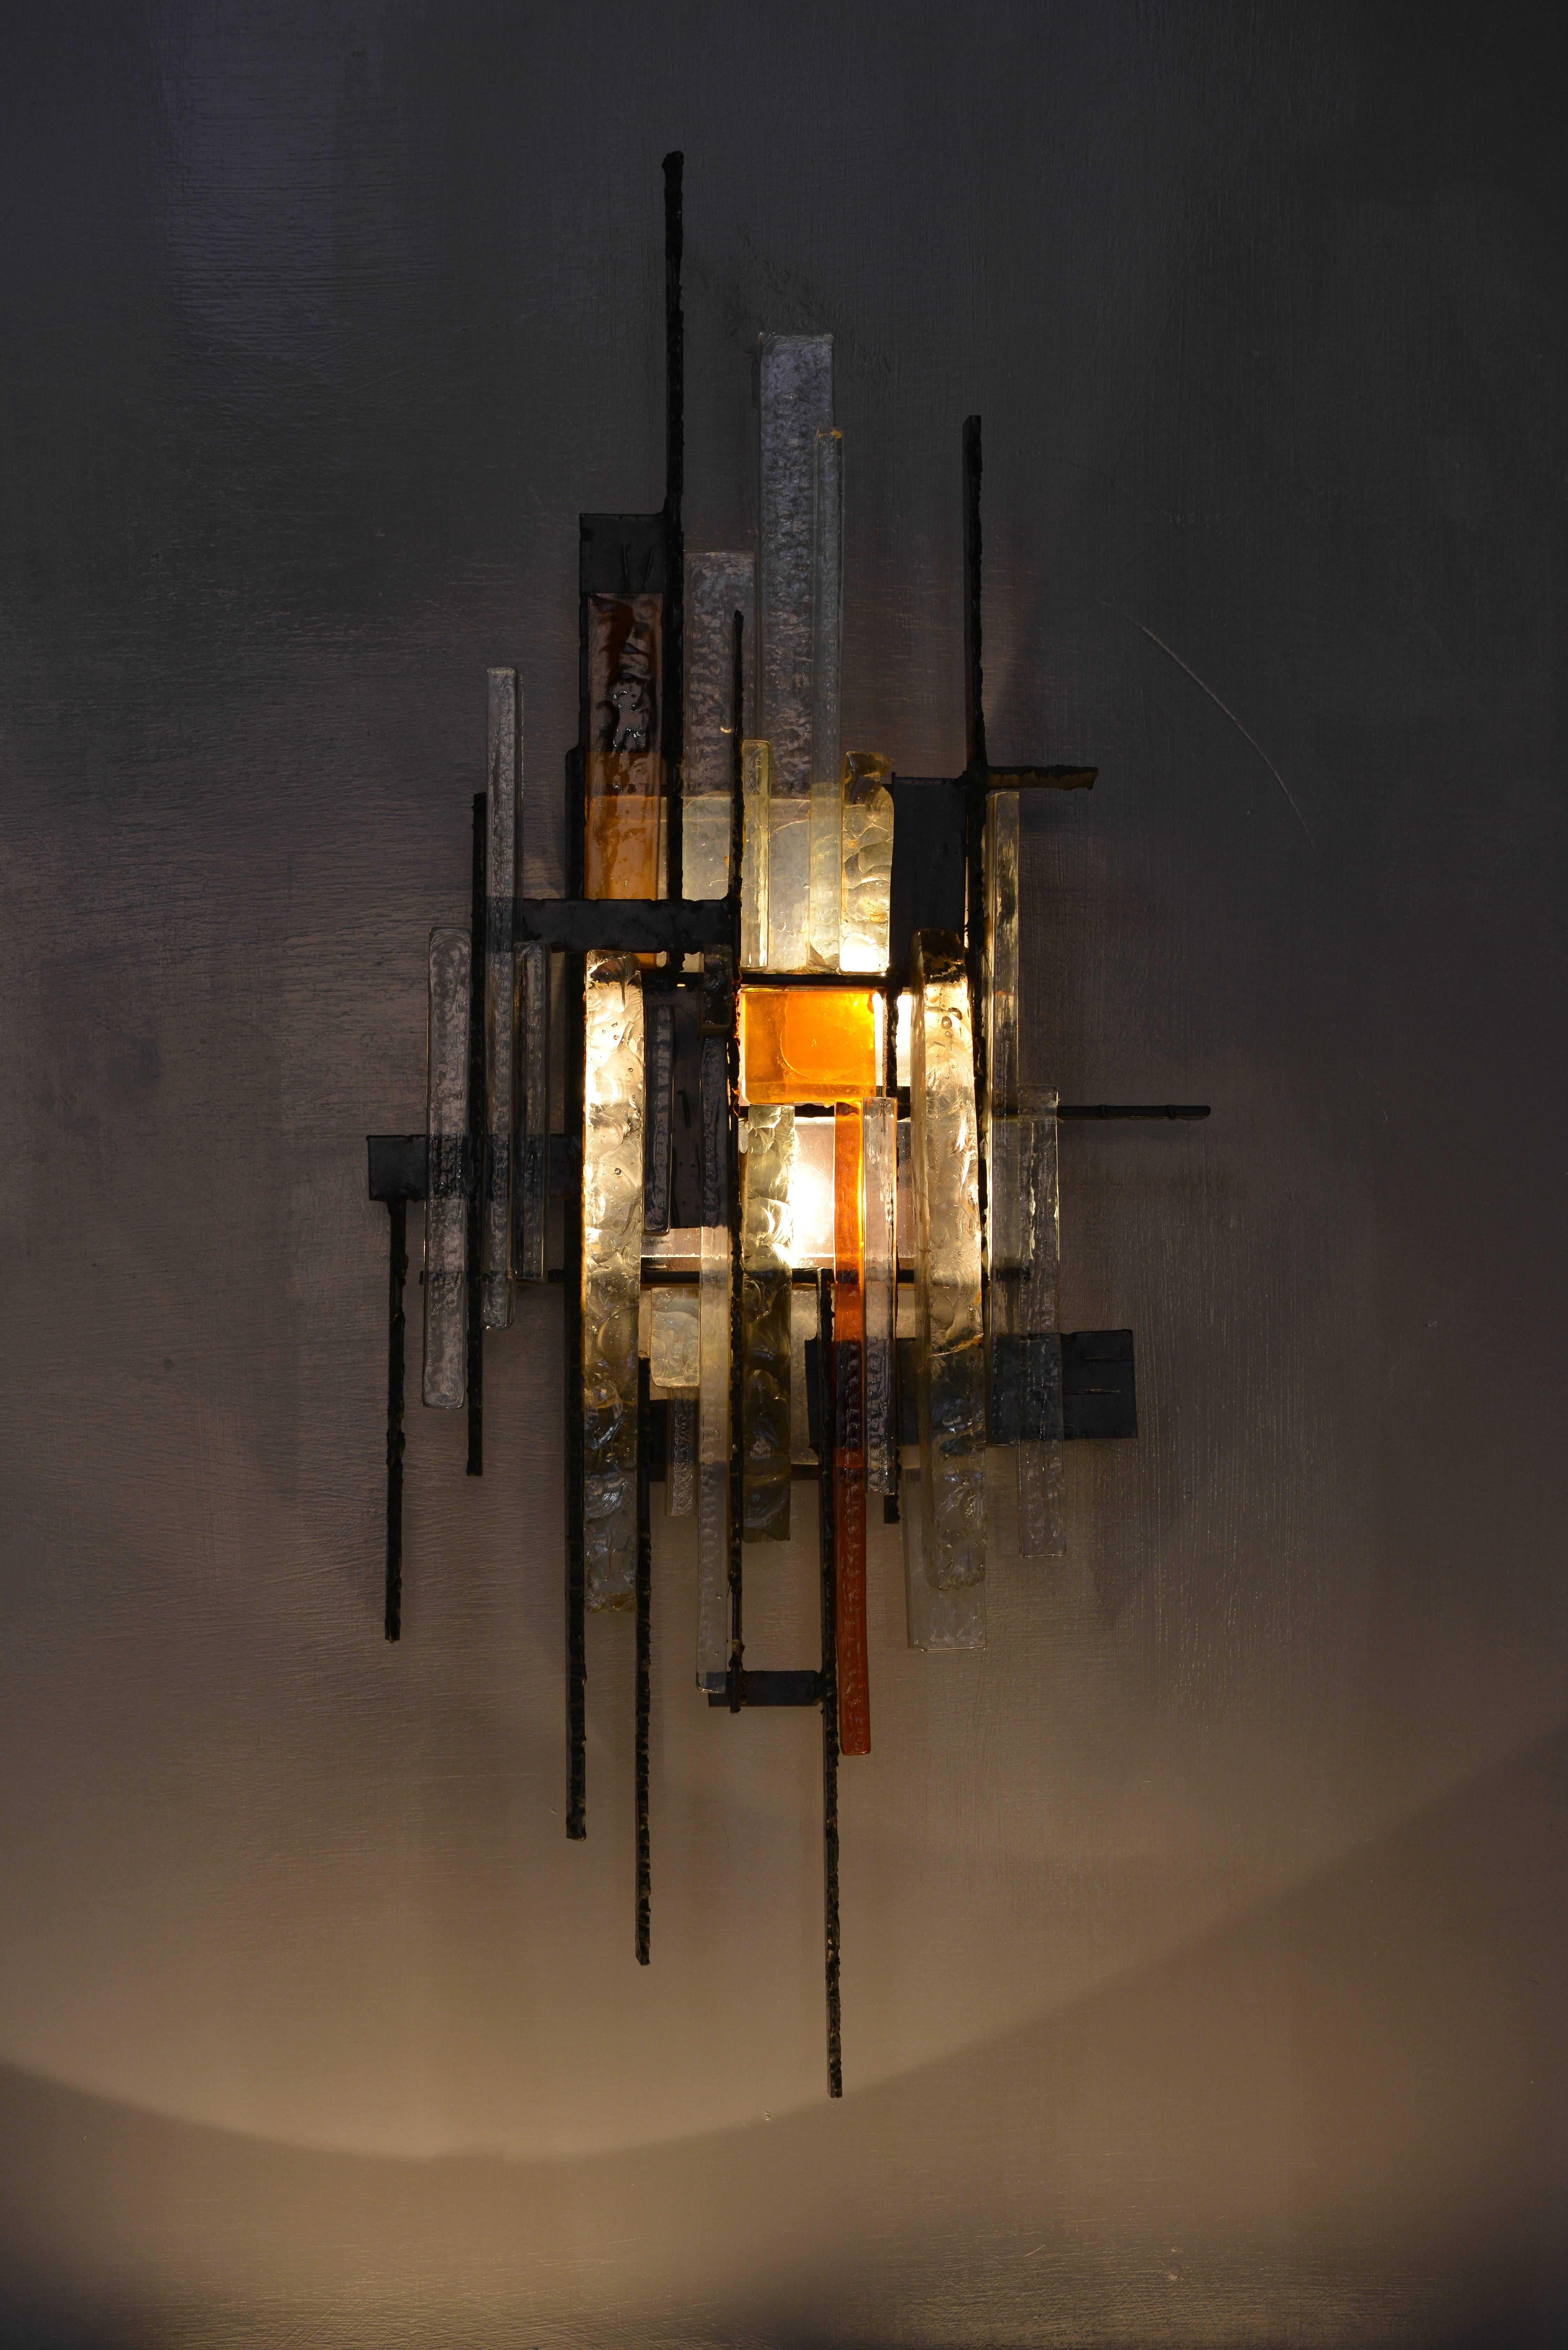 Designed by Albano Poli for Poliarte. The sconce has three internal lightbulb fixtures.